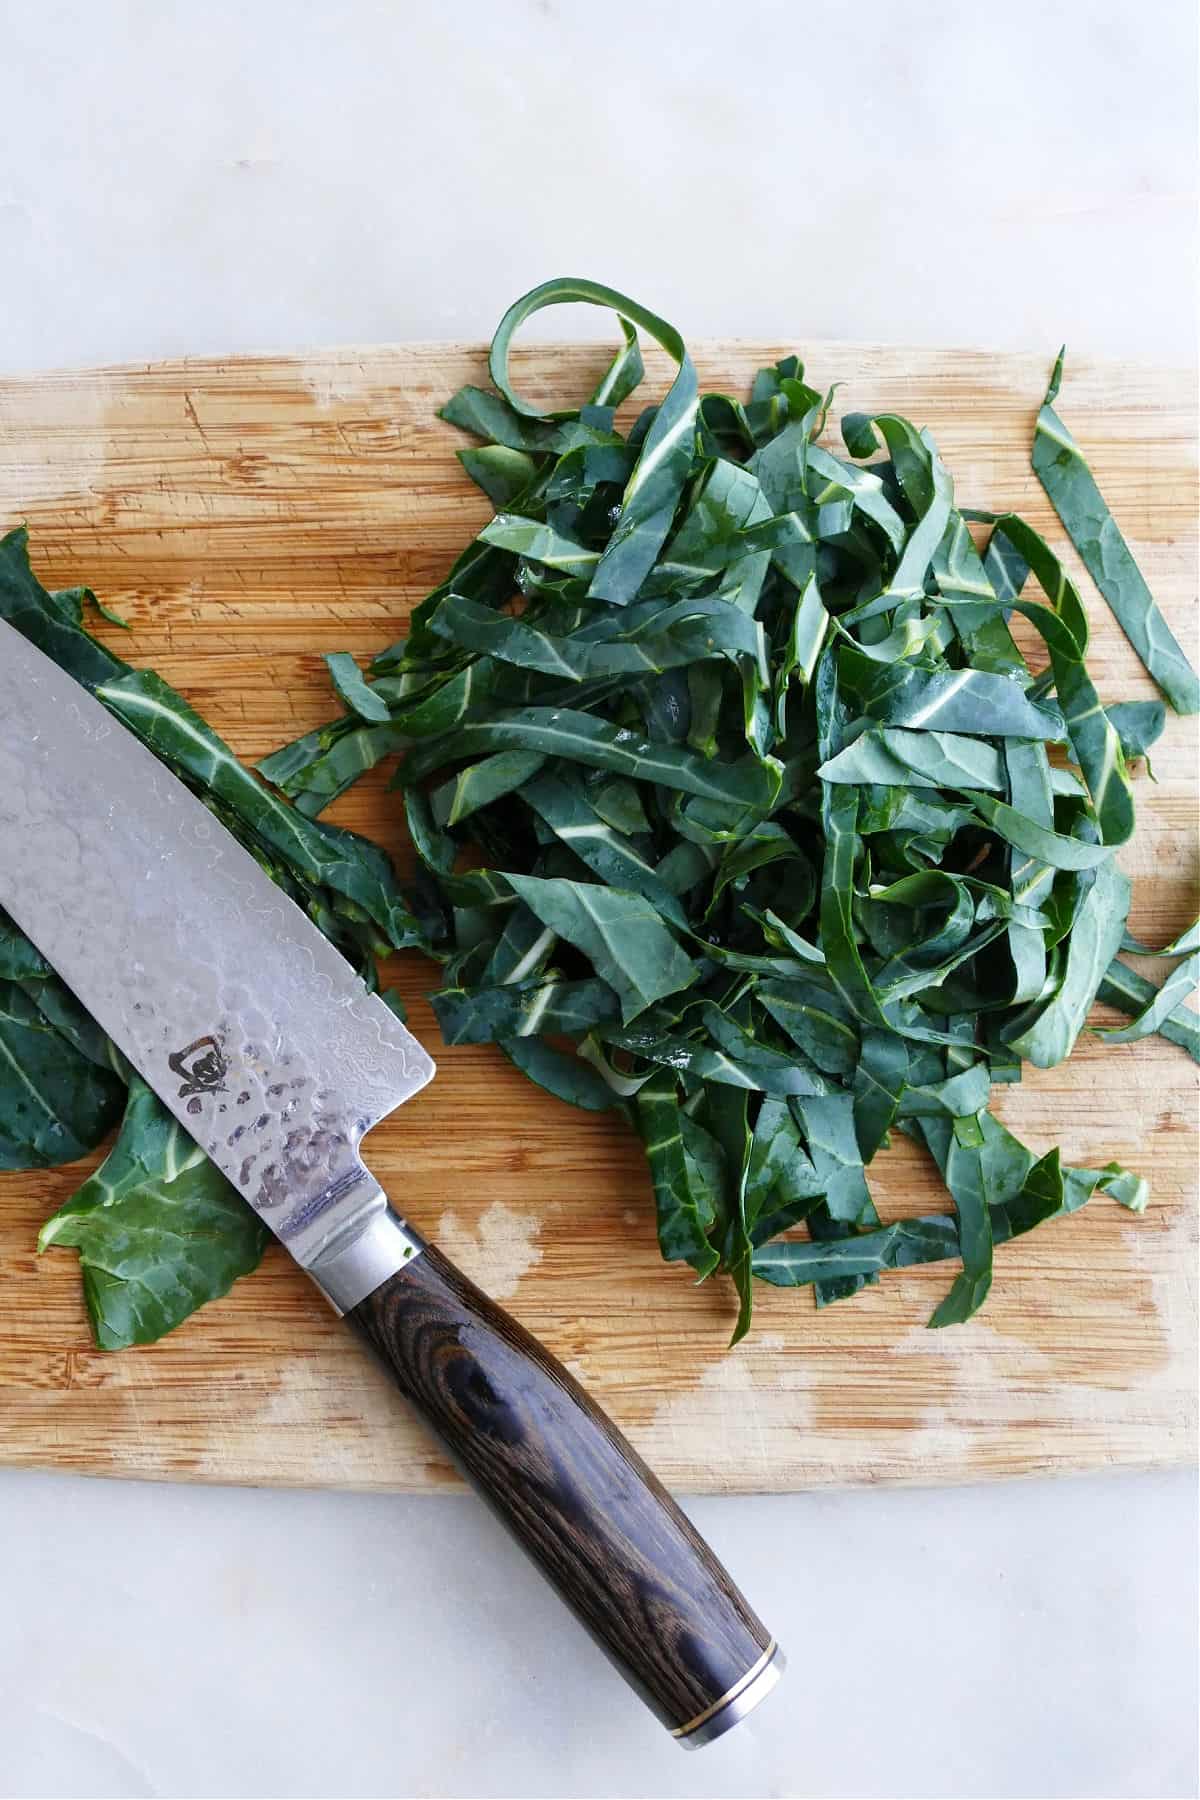 collard greens sliced into ribbons on a cutting board next to a chef's knife